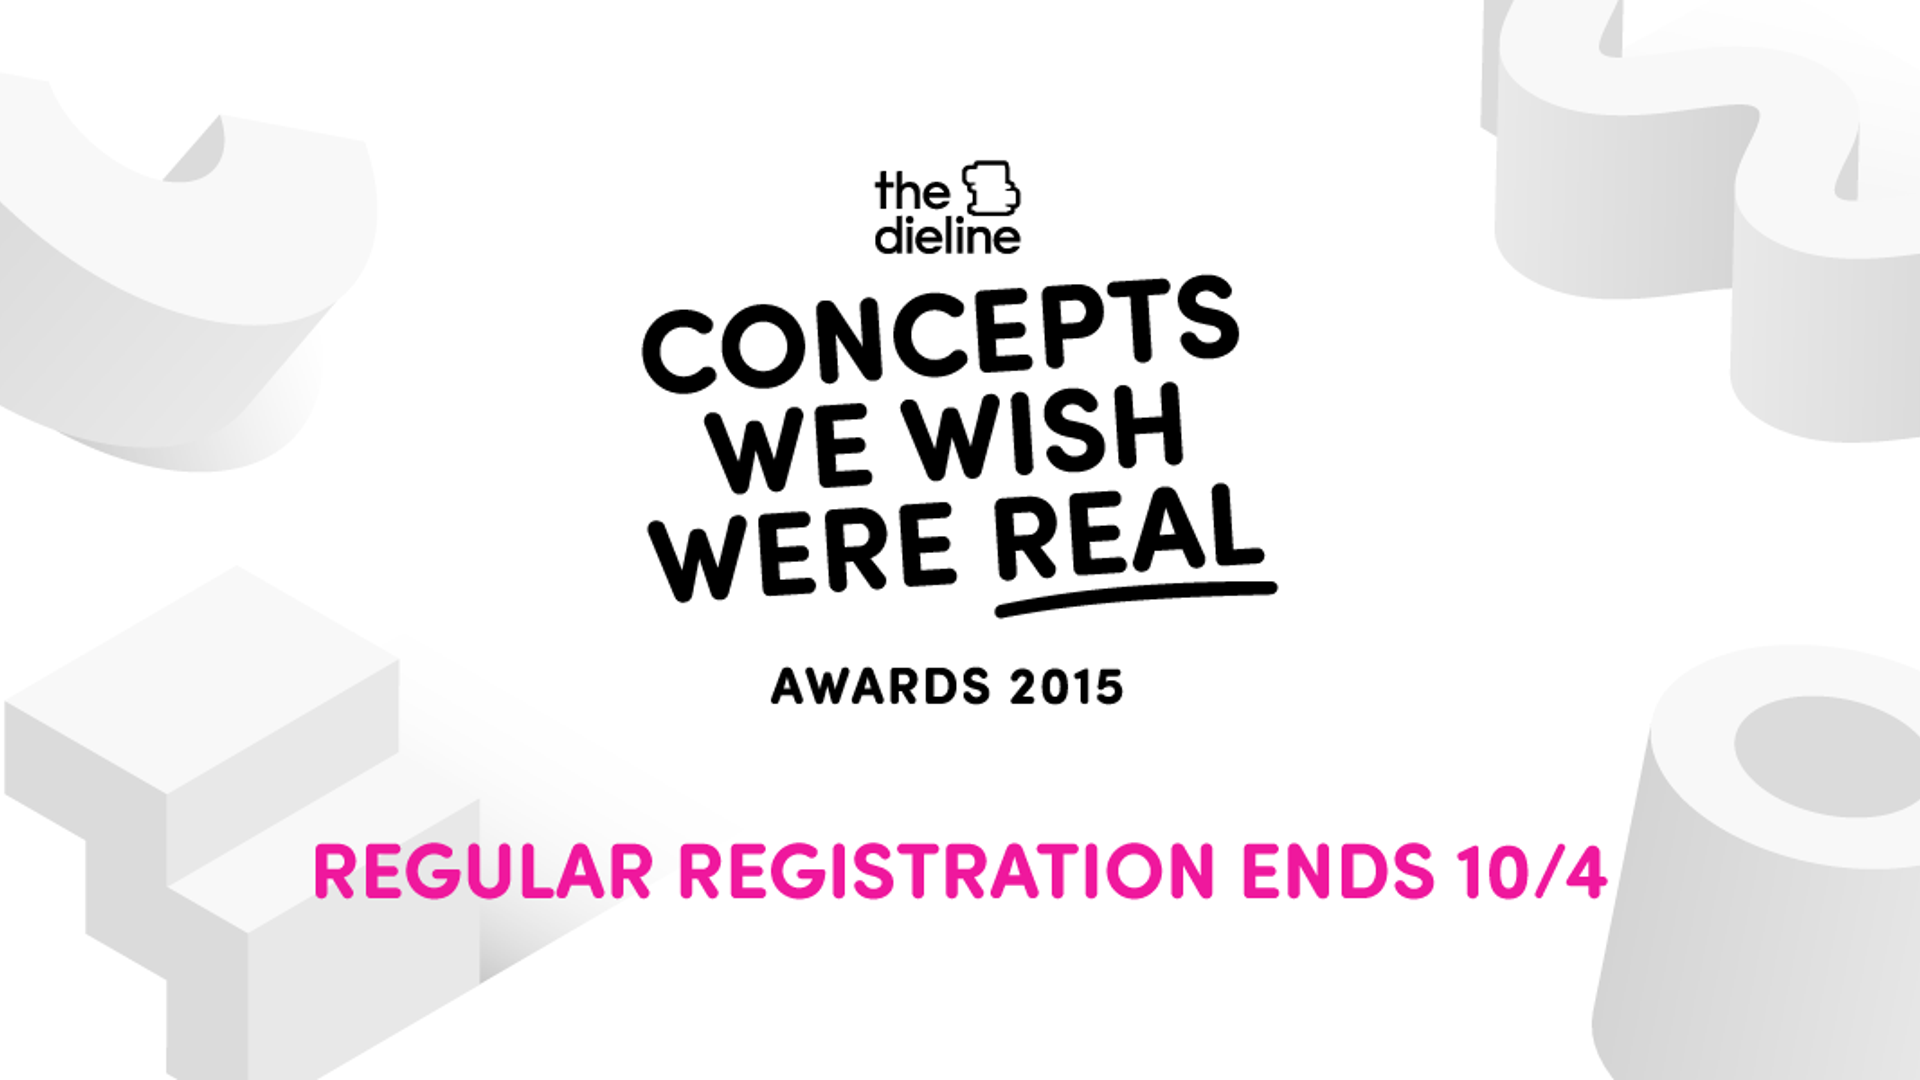 Featured image for Concepts We Wish Were Real Awards - Regular Registration Ends 10/4